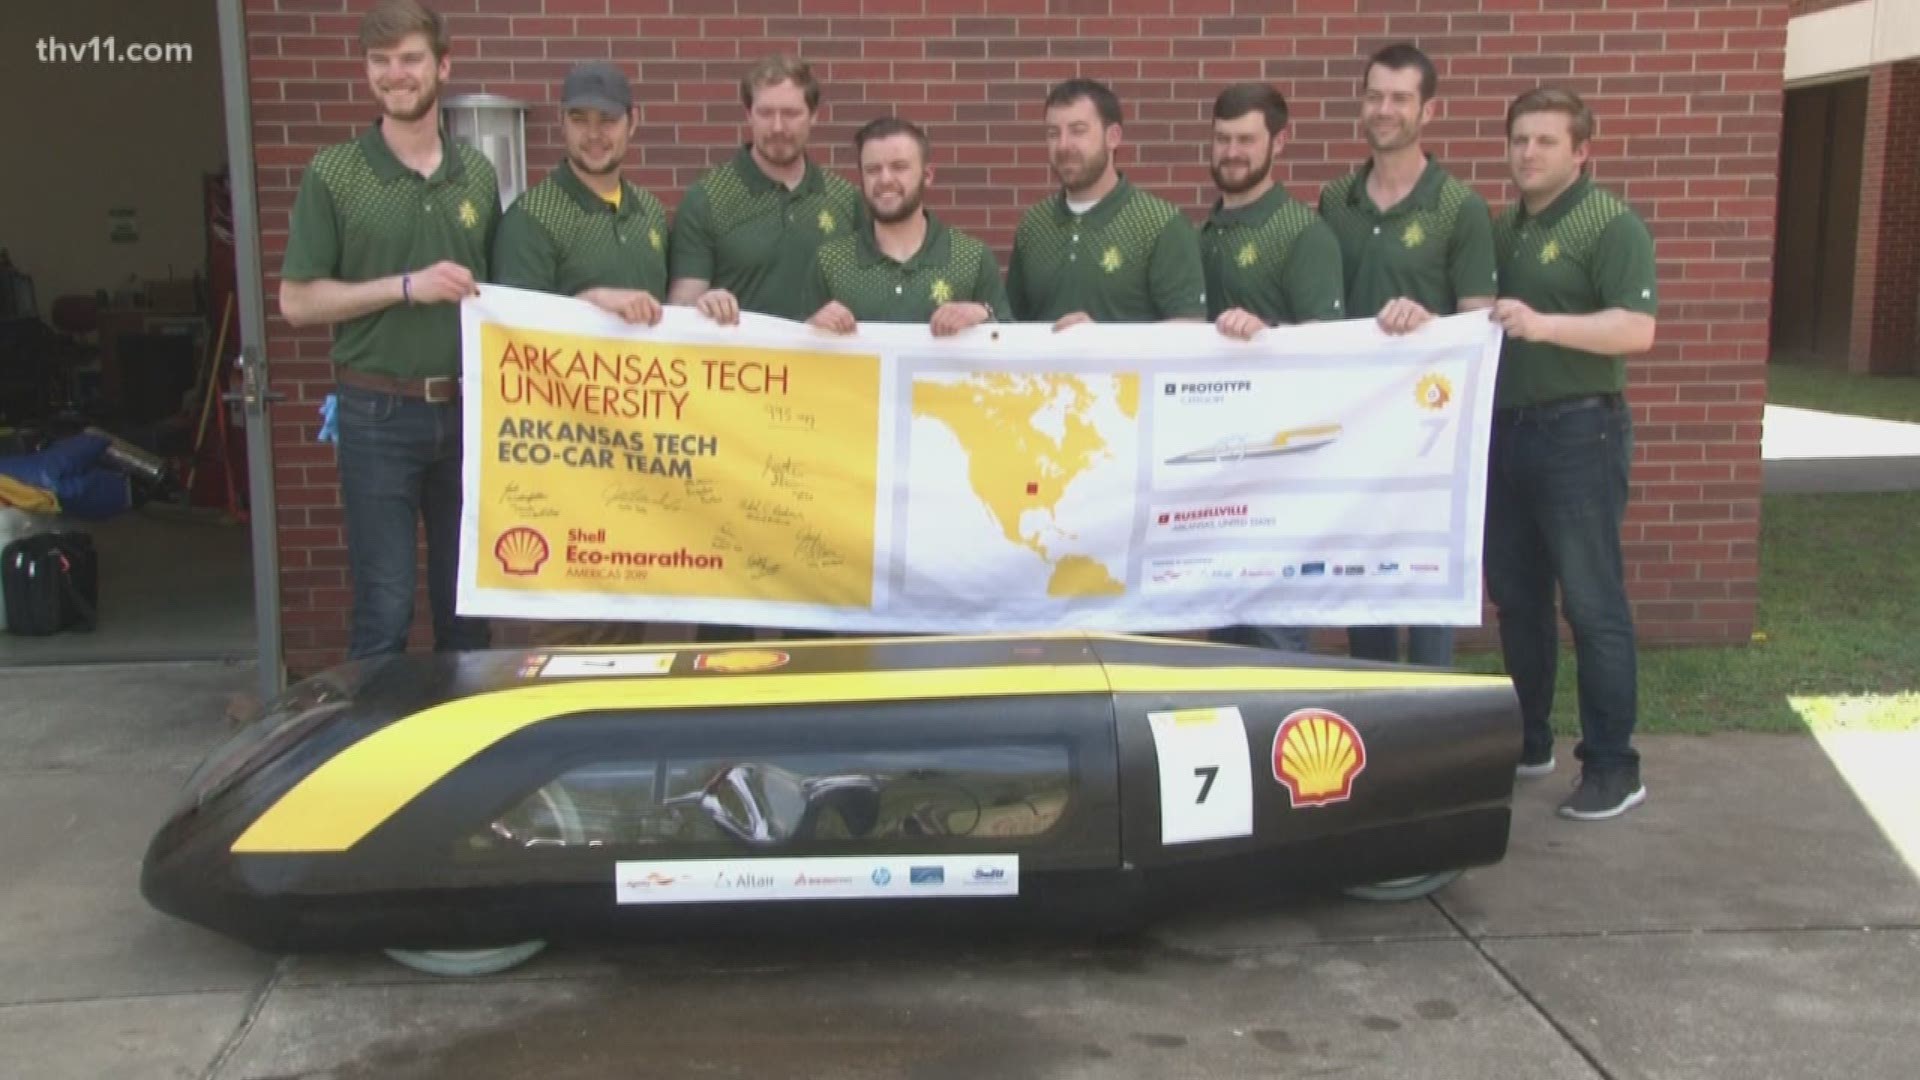 A group of Arkansas Tech students built a car that gets nearly 1,000 miles per gallon.